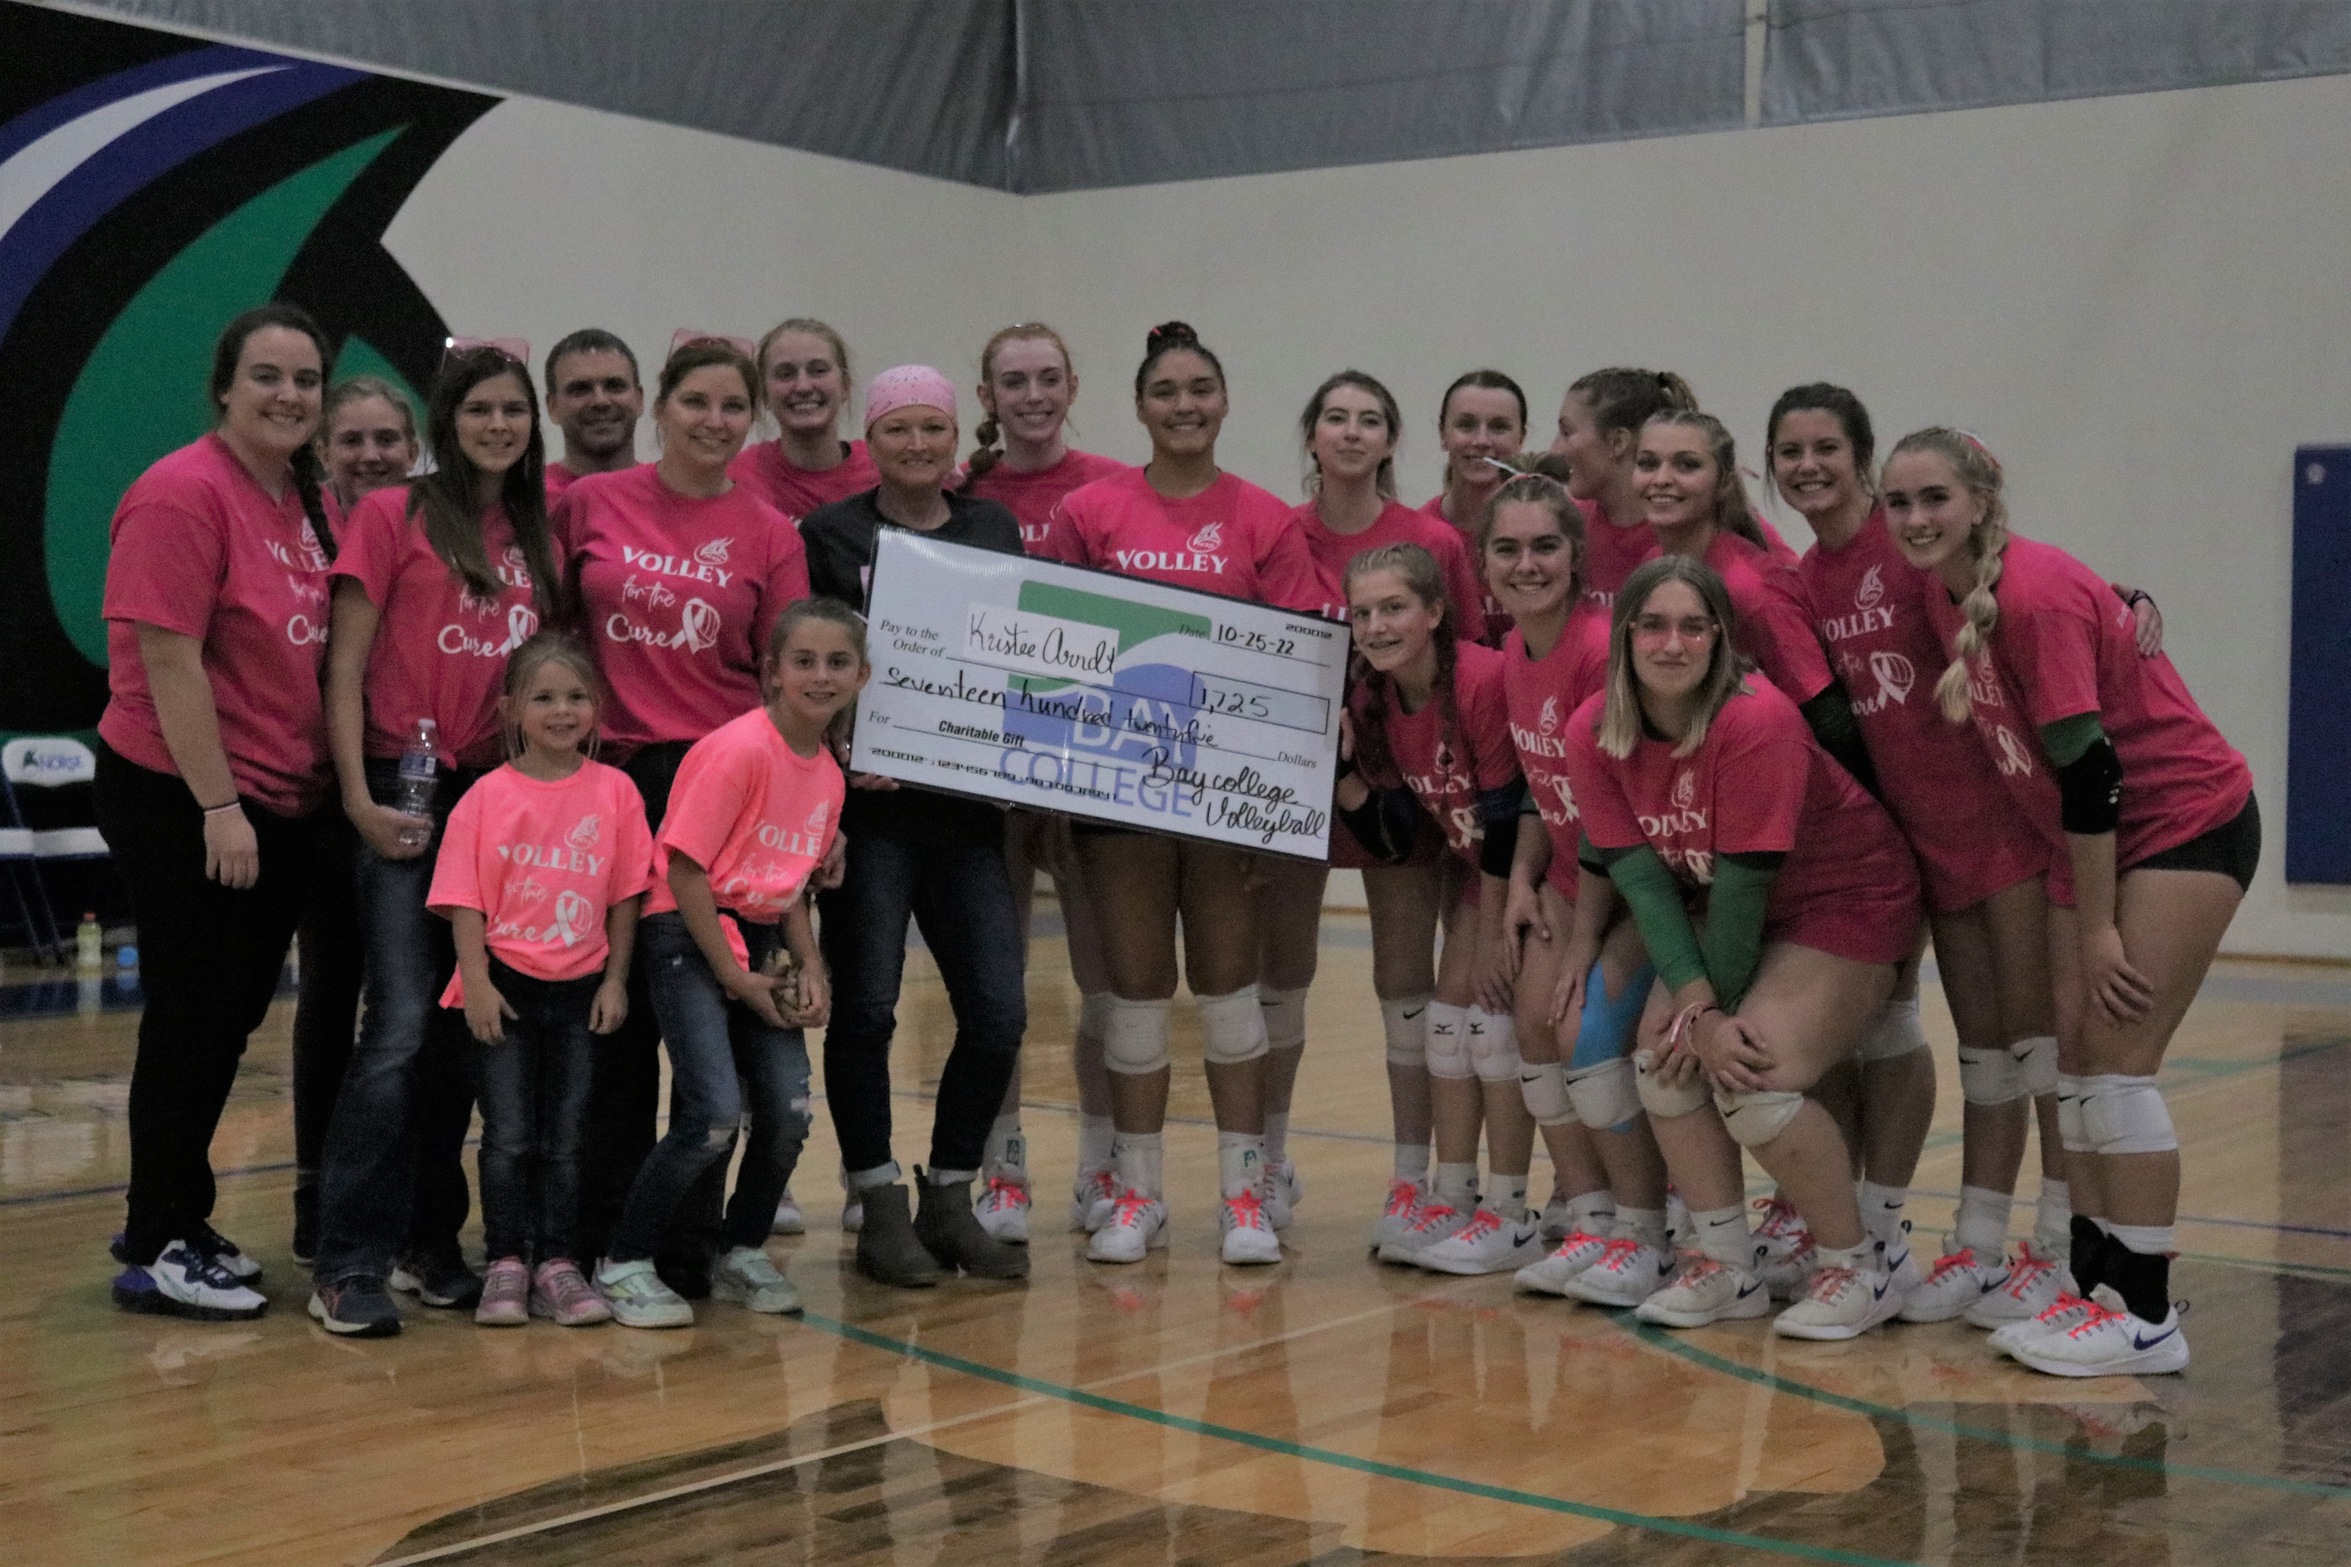 The Norse Volleyball team poses with Kristee Arndt and a ceremonial check indicating the amount raised in the evening's event.